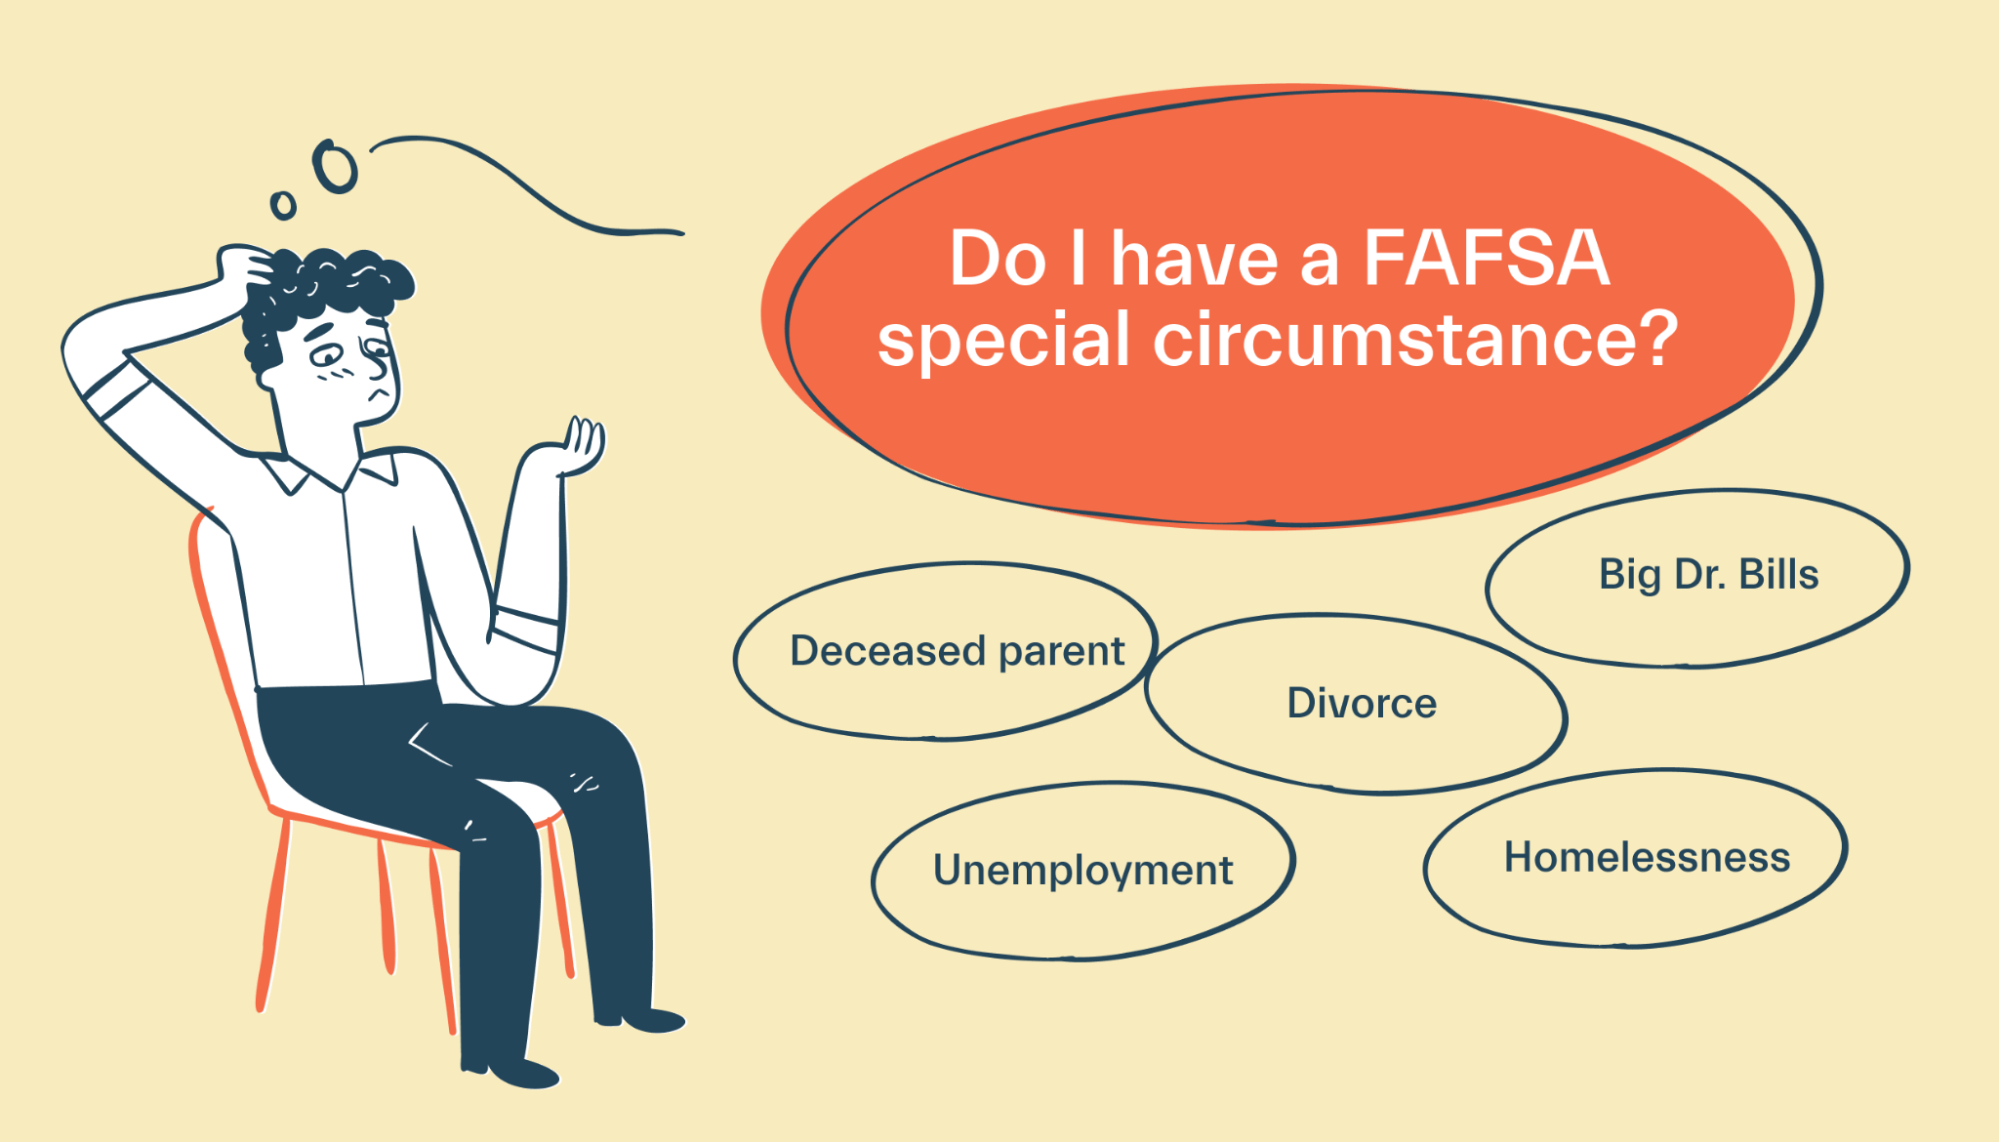 Do I Have A FAFSA Special Circumstance